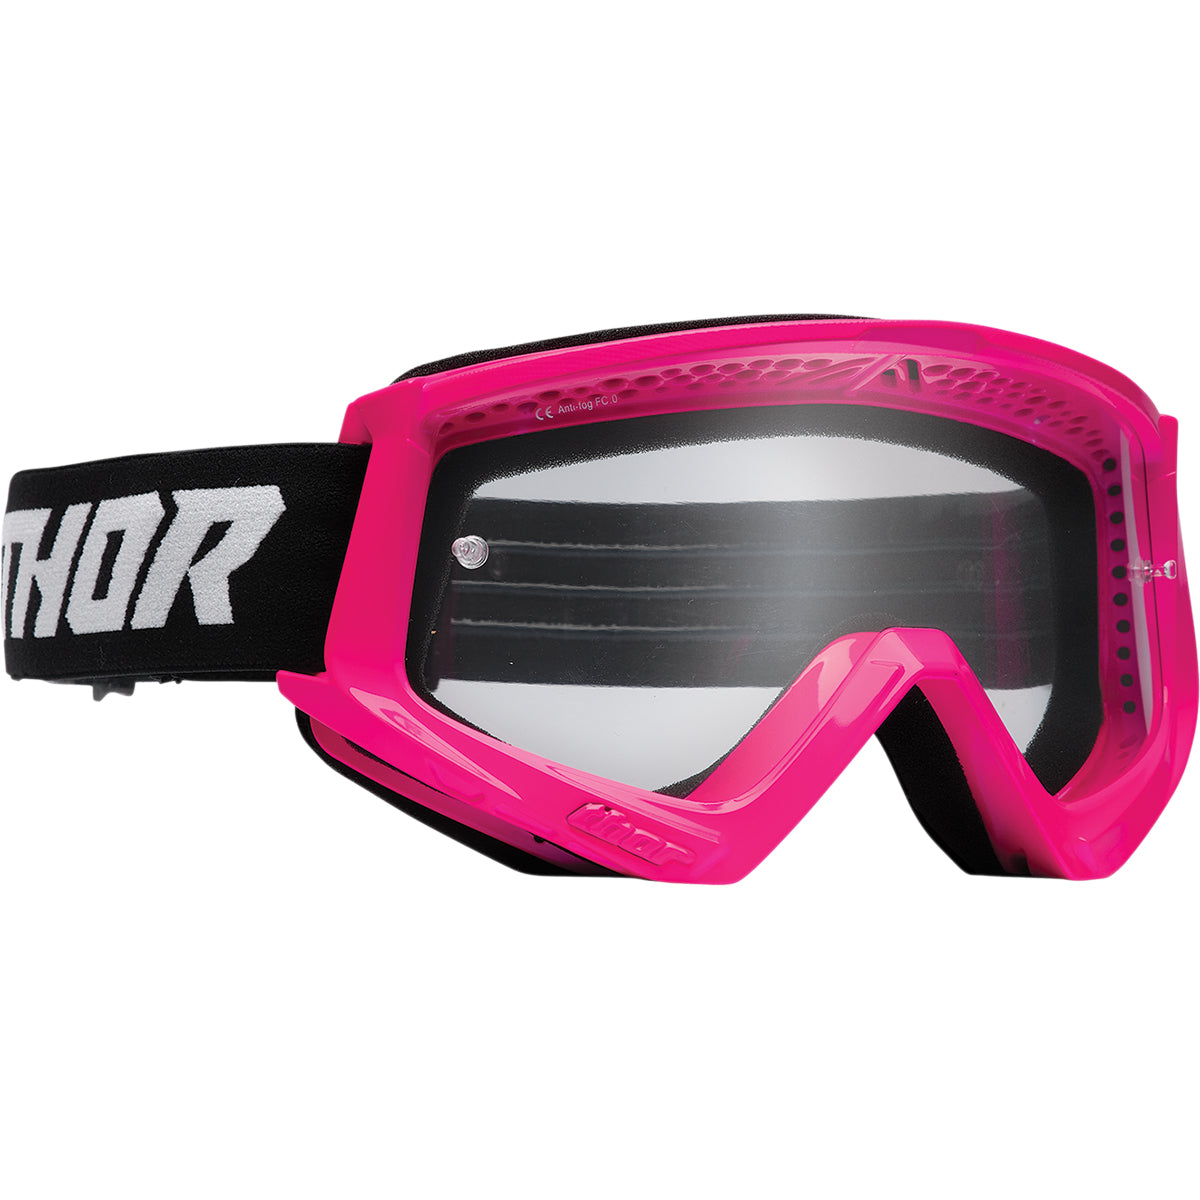 THOR Youth Combat Racer Goggles